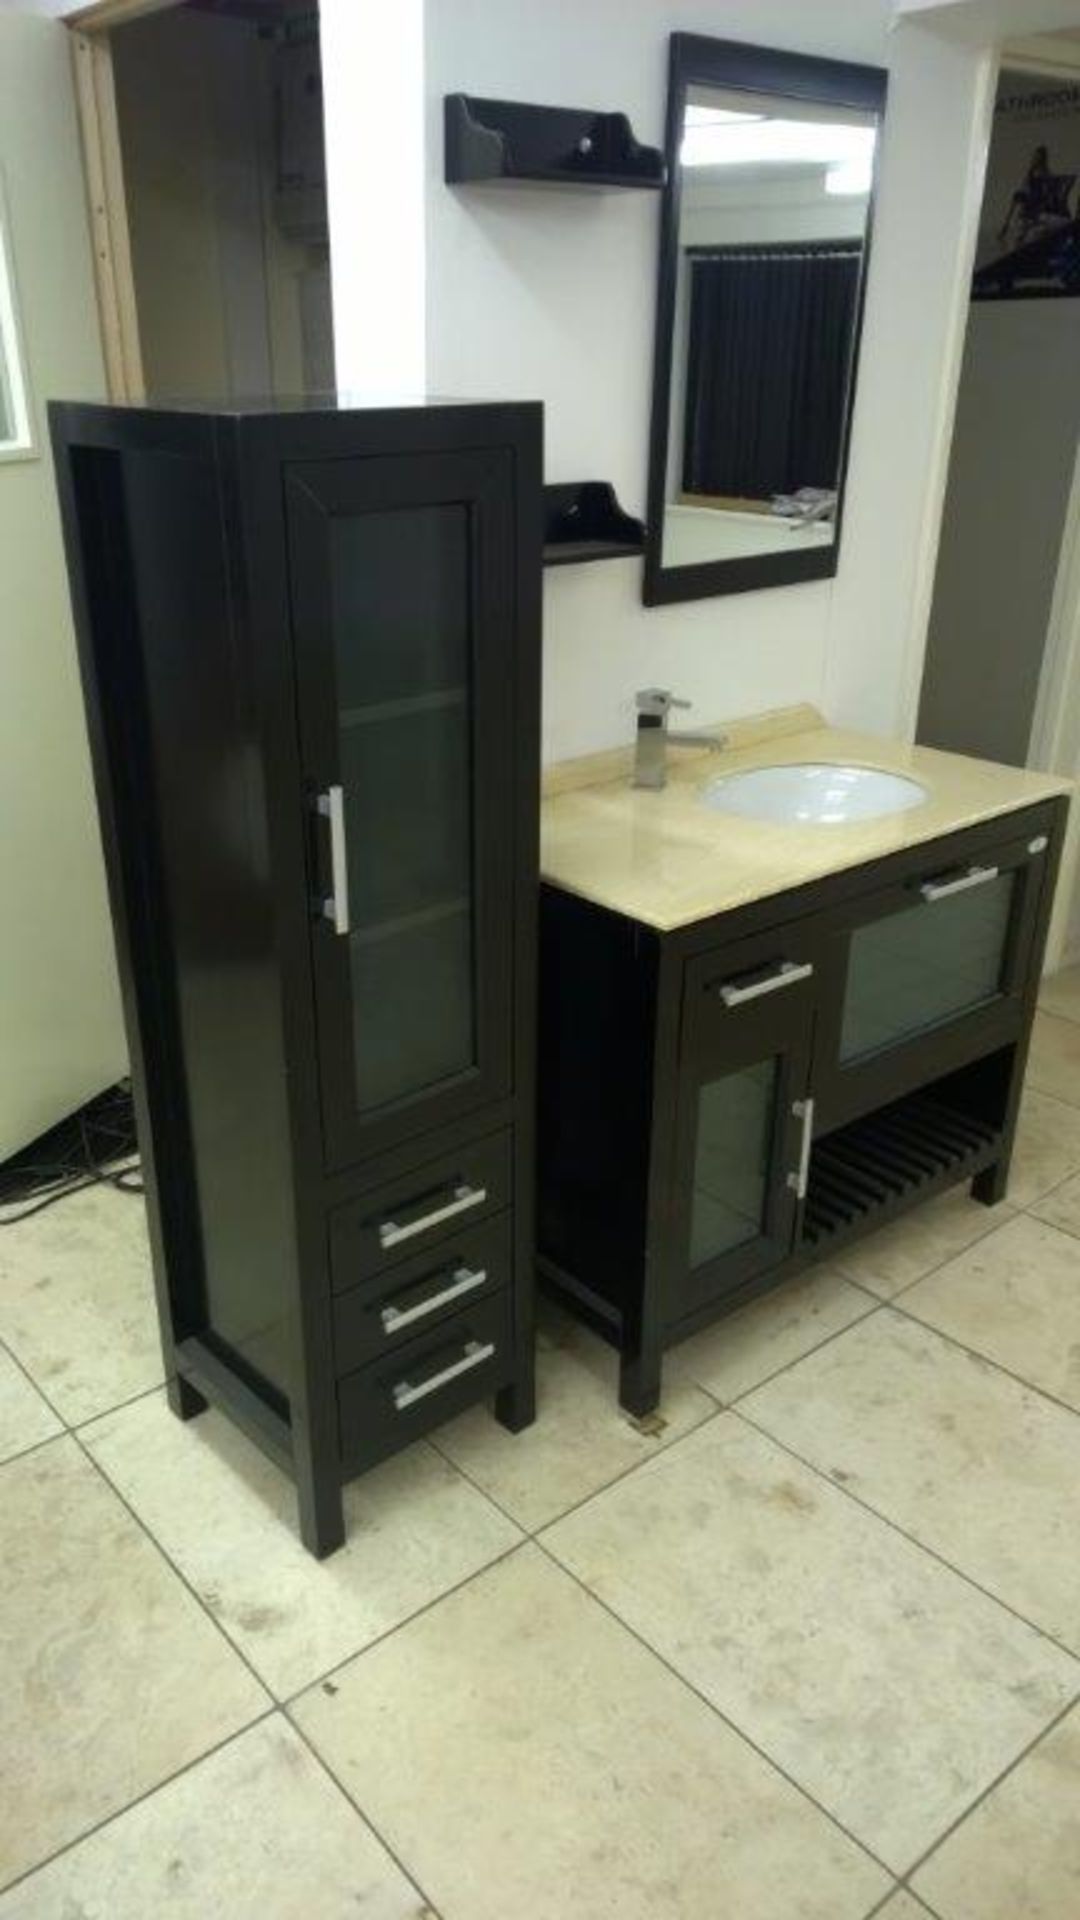 ADBF15 new and boxed  in black colour, complete set including free standing vanity unit with a solid